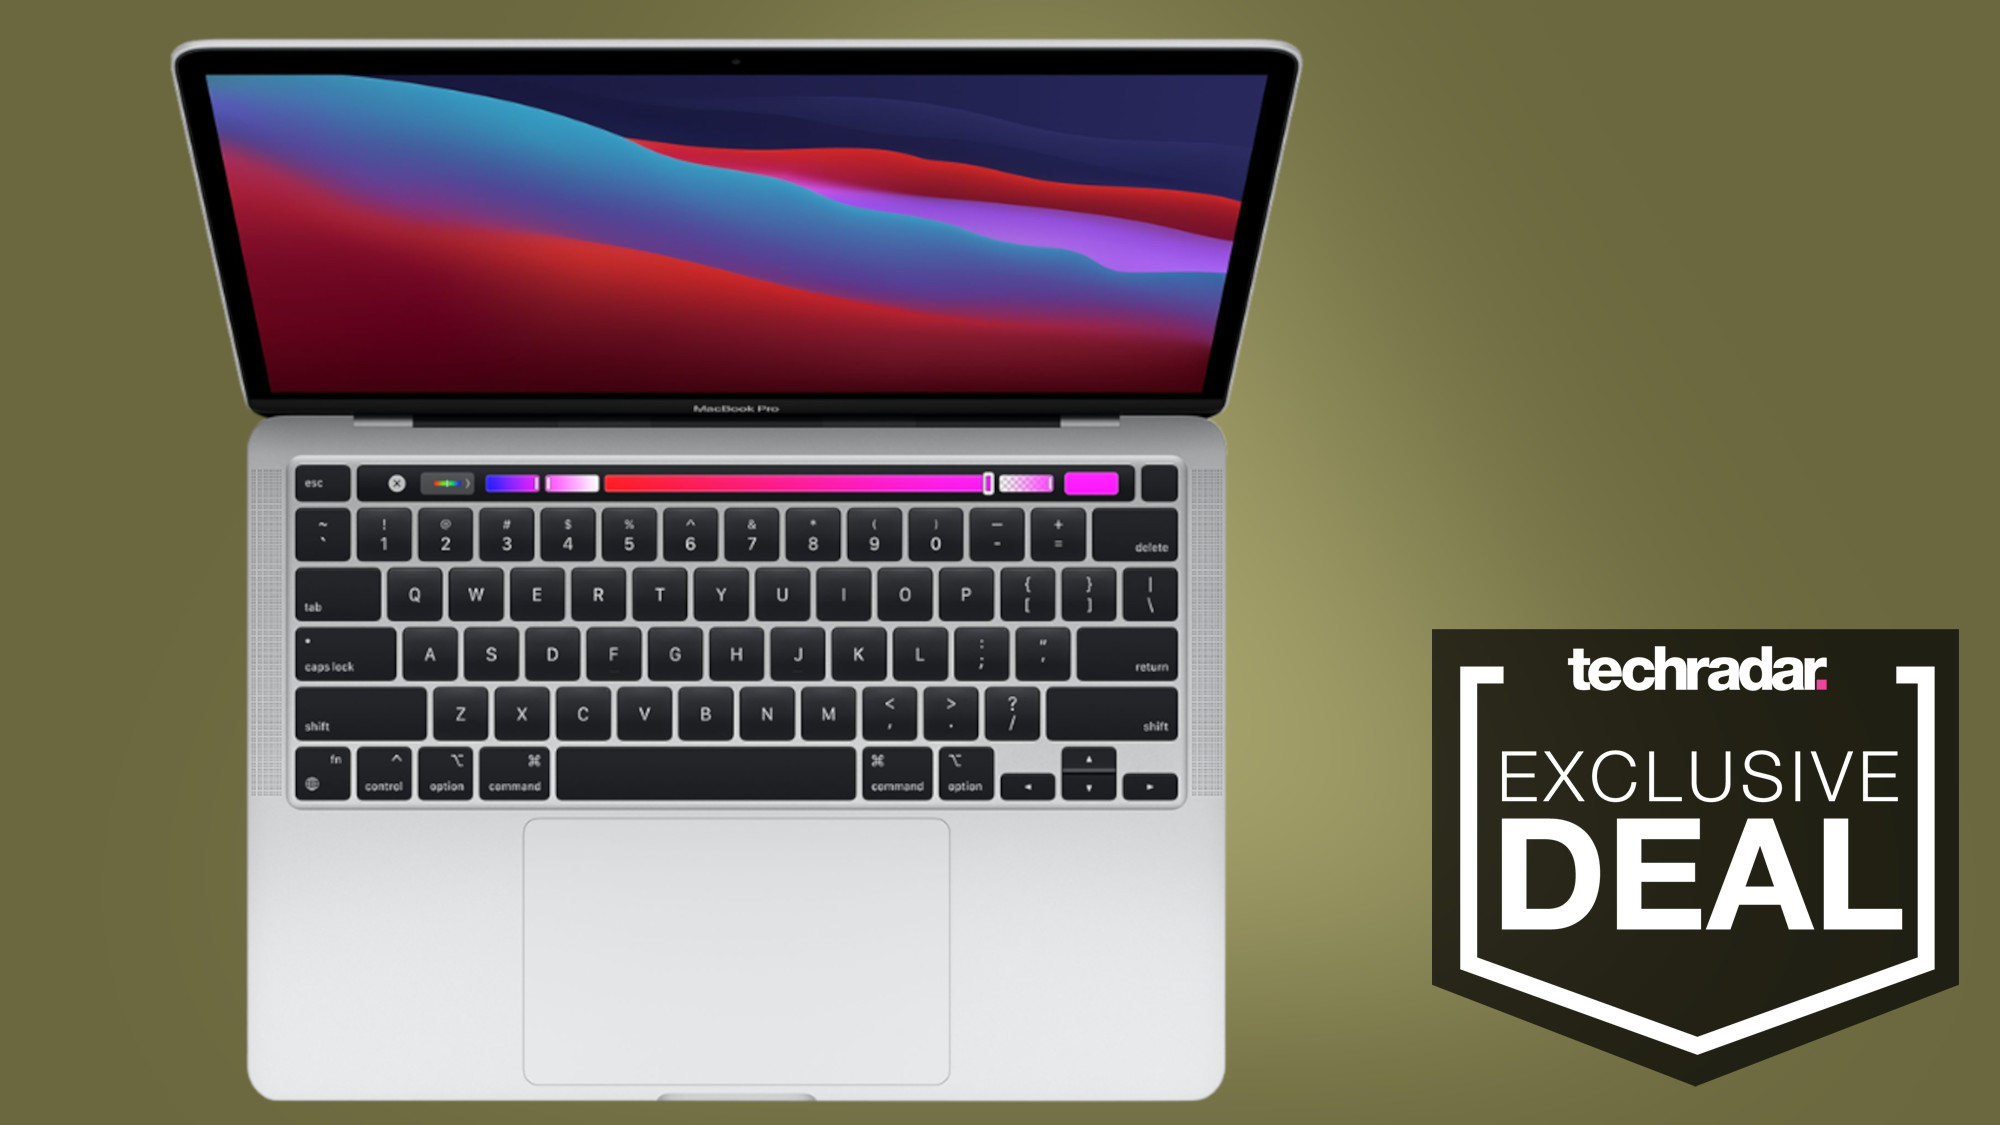 This is one of the best MacBook Pro deals we've ever seen on Black Friday thumbnail